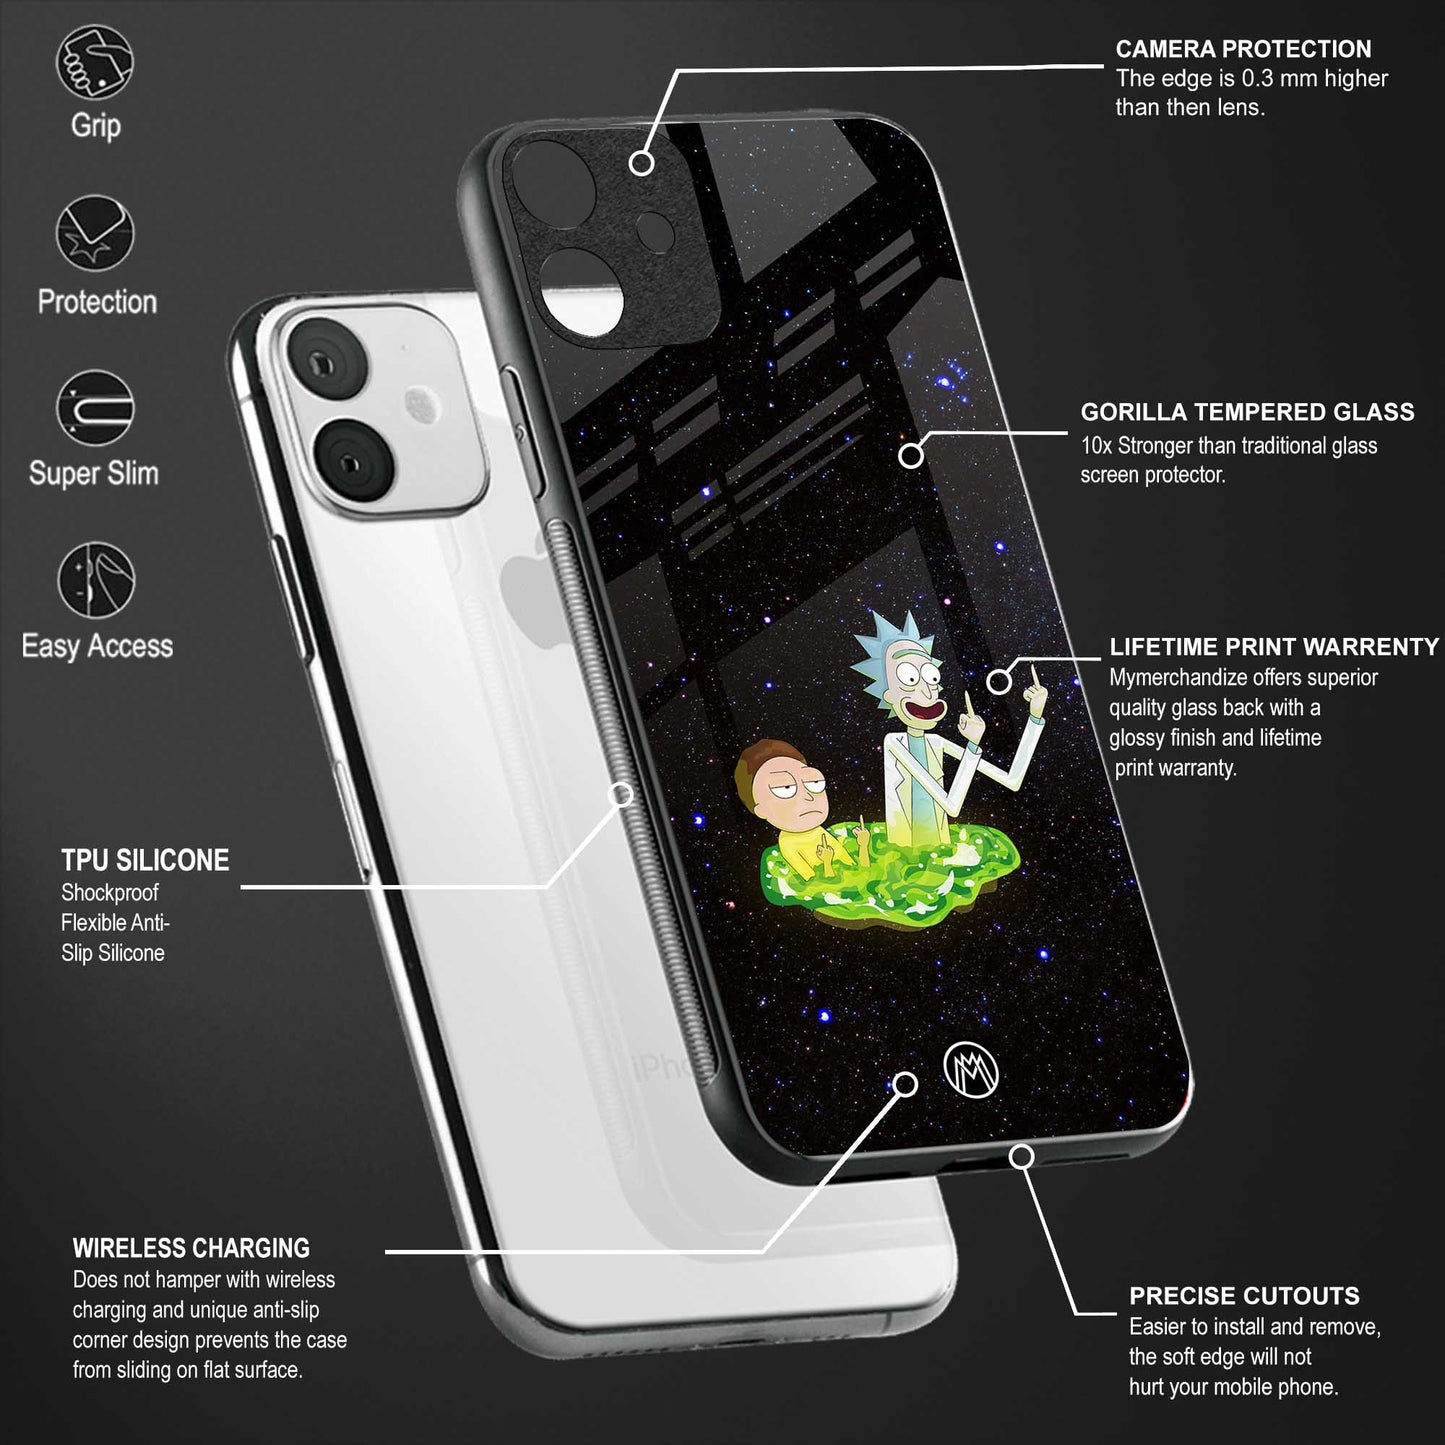 rick and morty fo aesthetic back phone cover | glass case for vivo y73